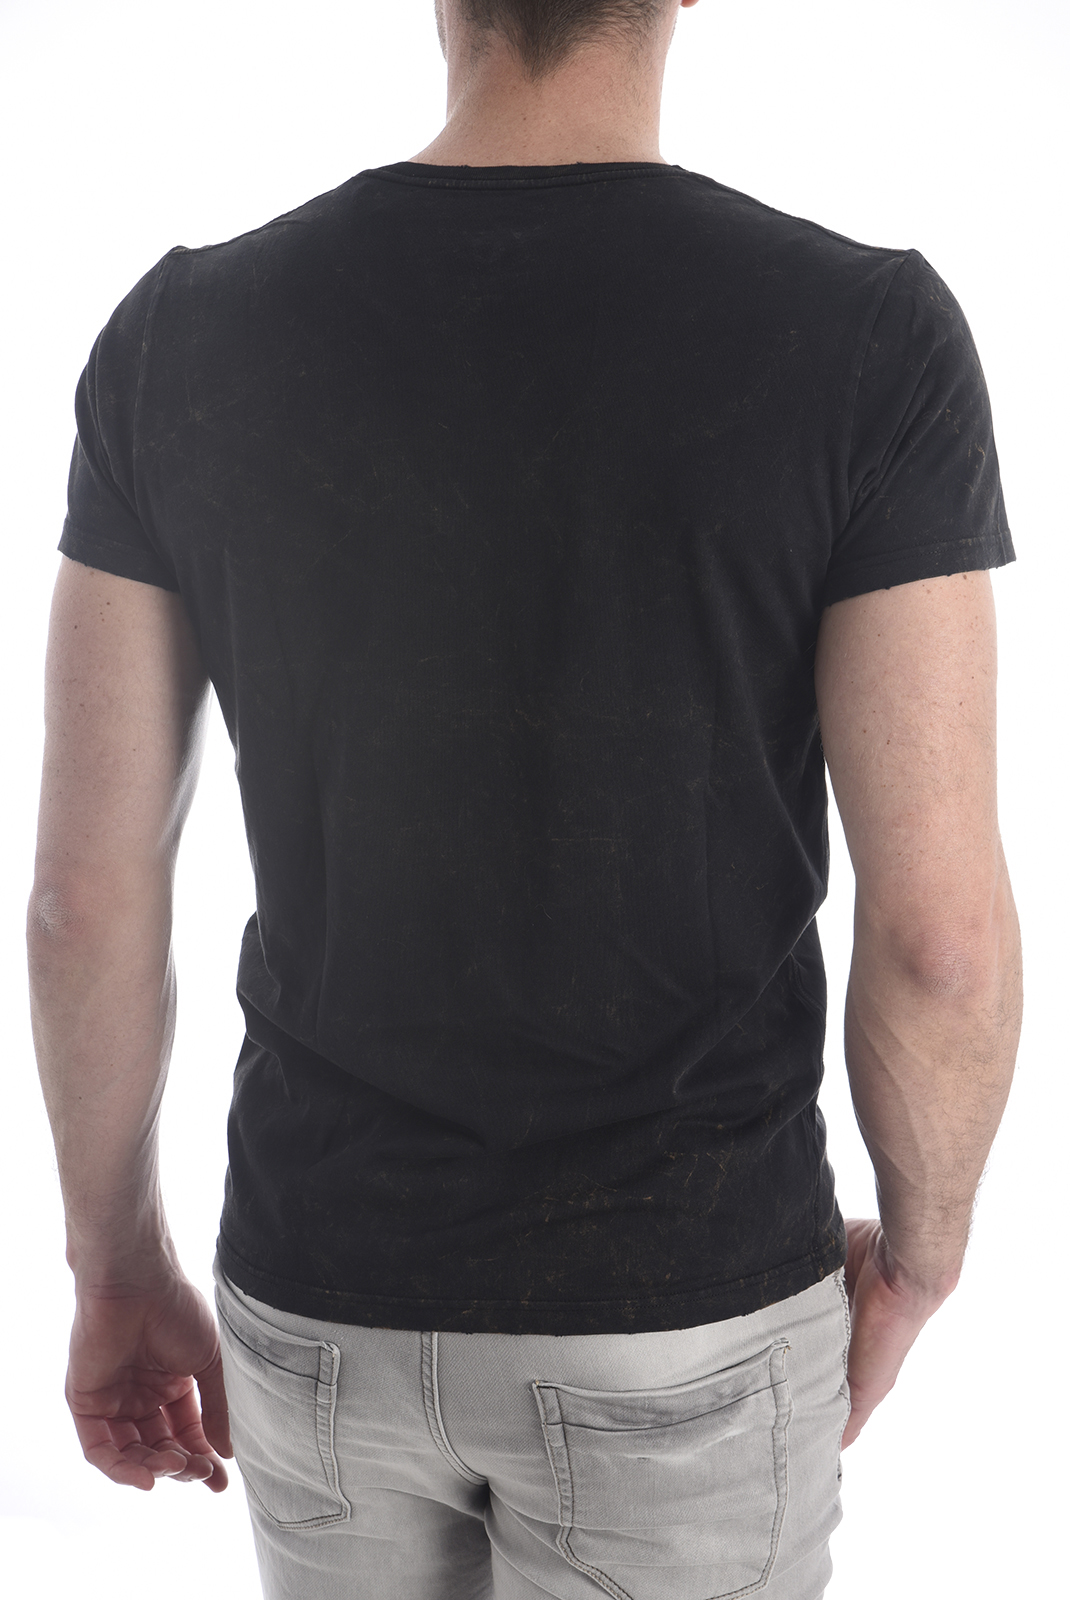 Tee-shirt noir vintage rider stretch homme - Pepe Jeans 